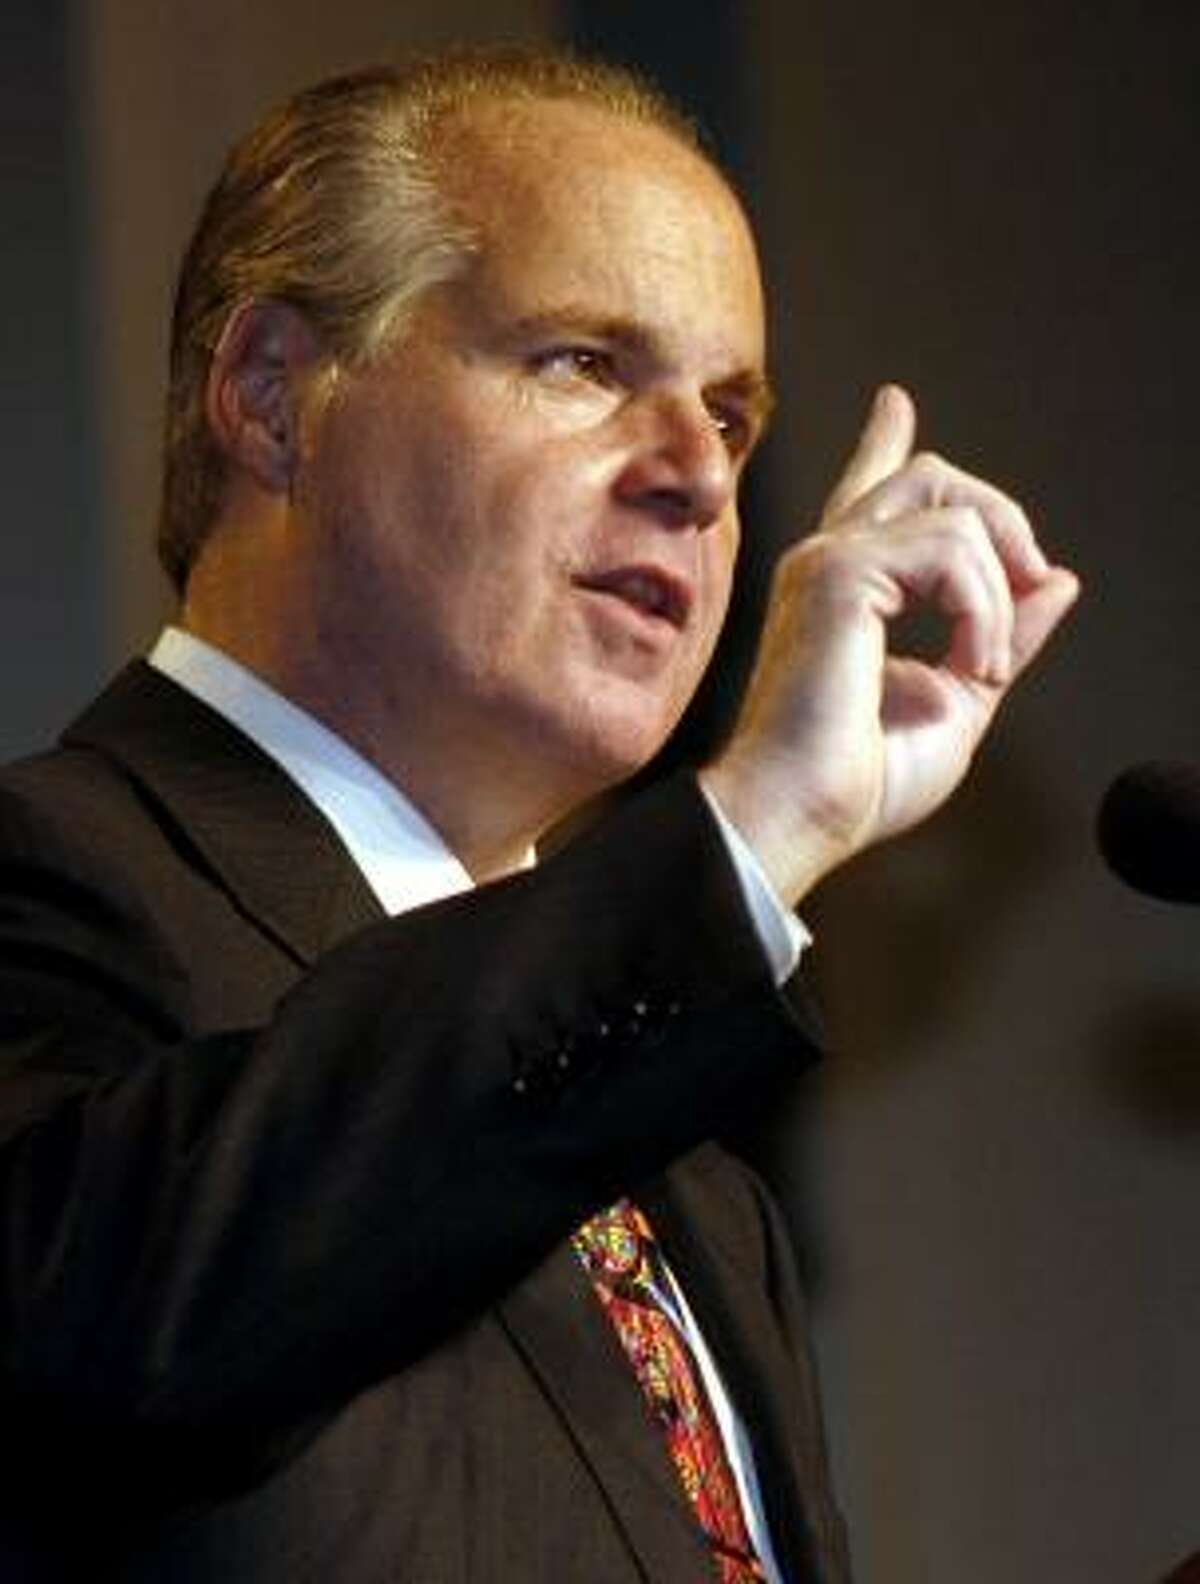 Rush Limbaugh's derisive comments about a Georgetown law students have prompted a backlash.